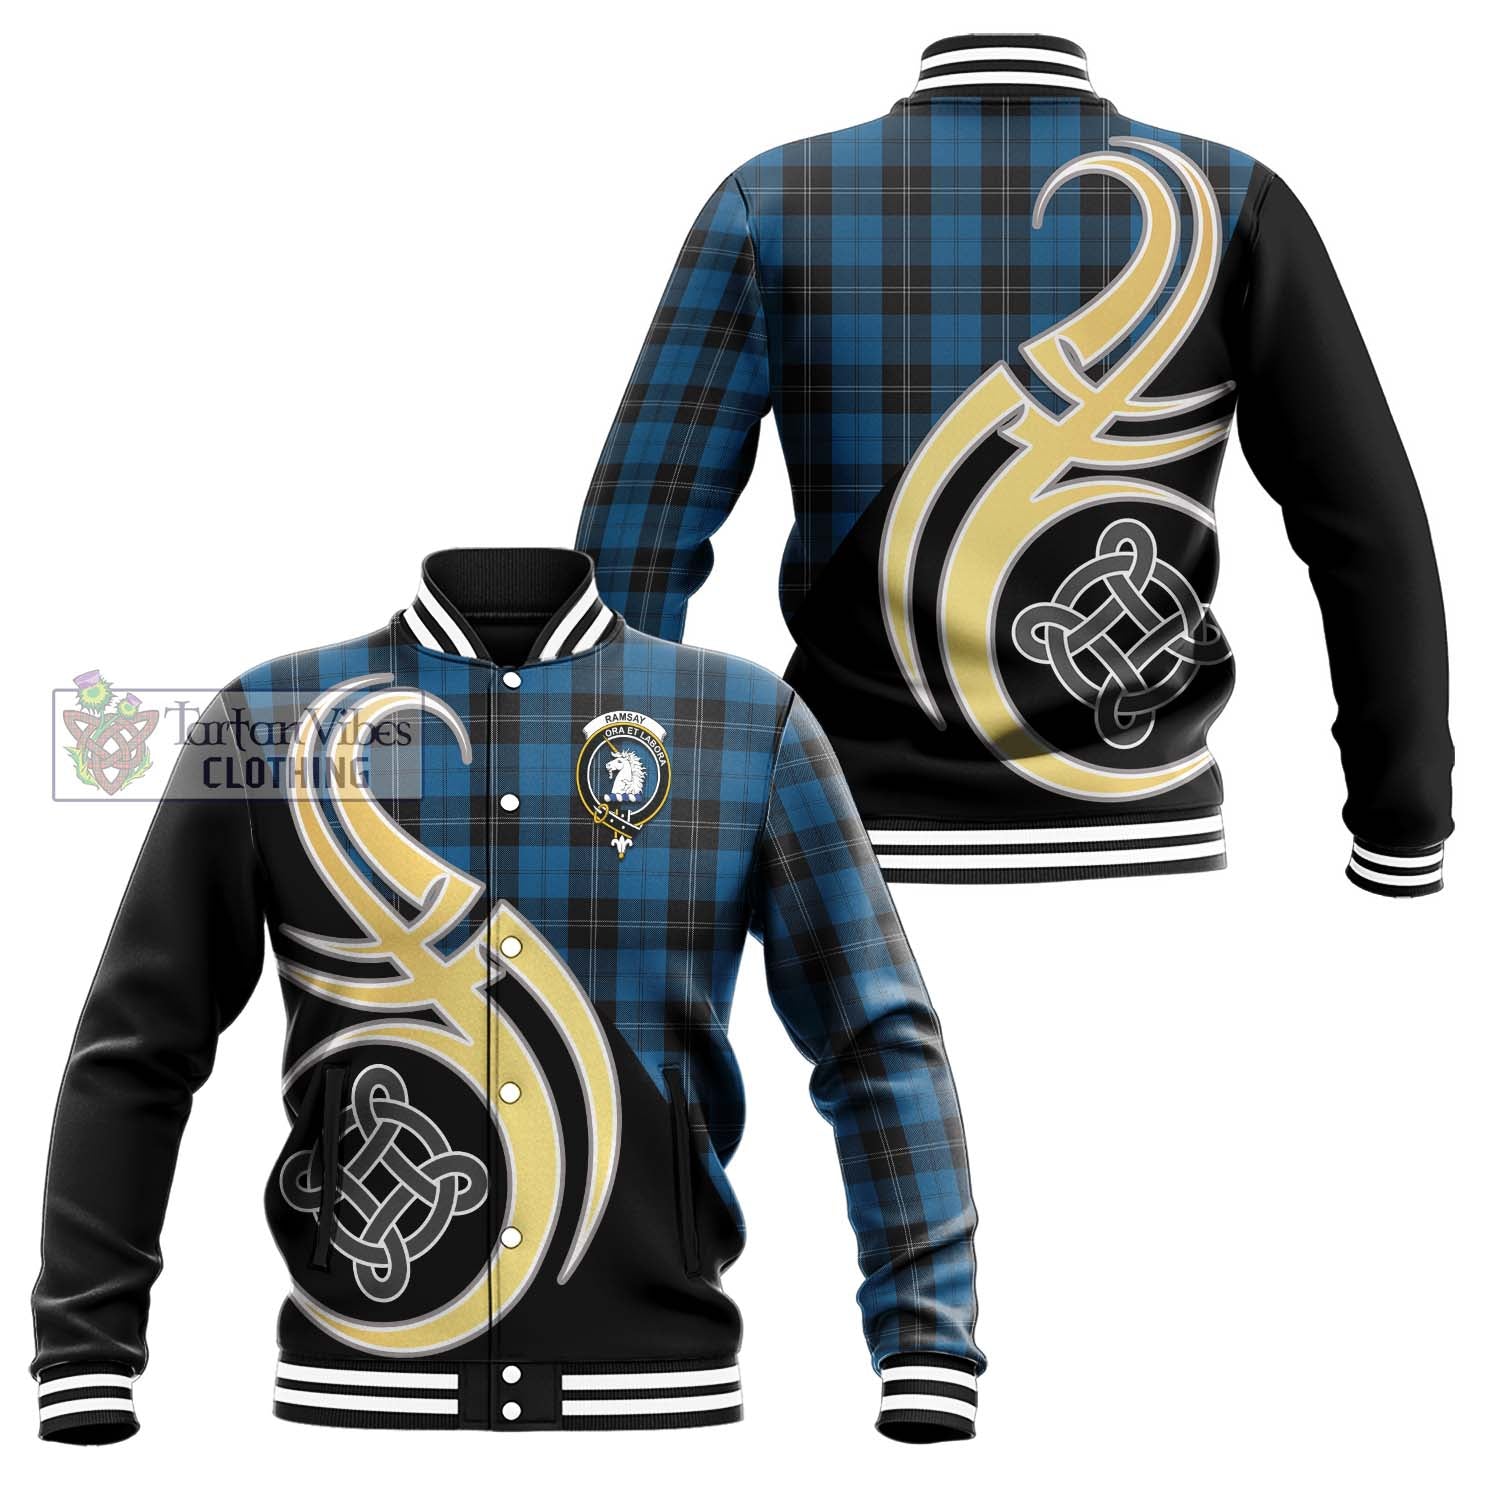 Tartan Vibes Clothing Ramsay Blue Hunting Tartan Baseball Jacket with Family Crest and Celtic Symbol Style